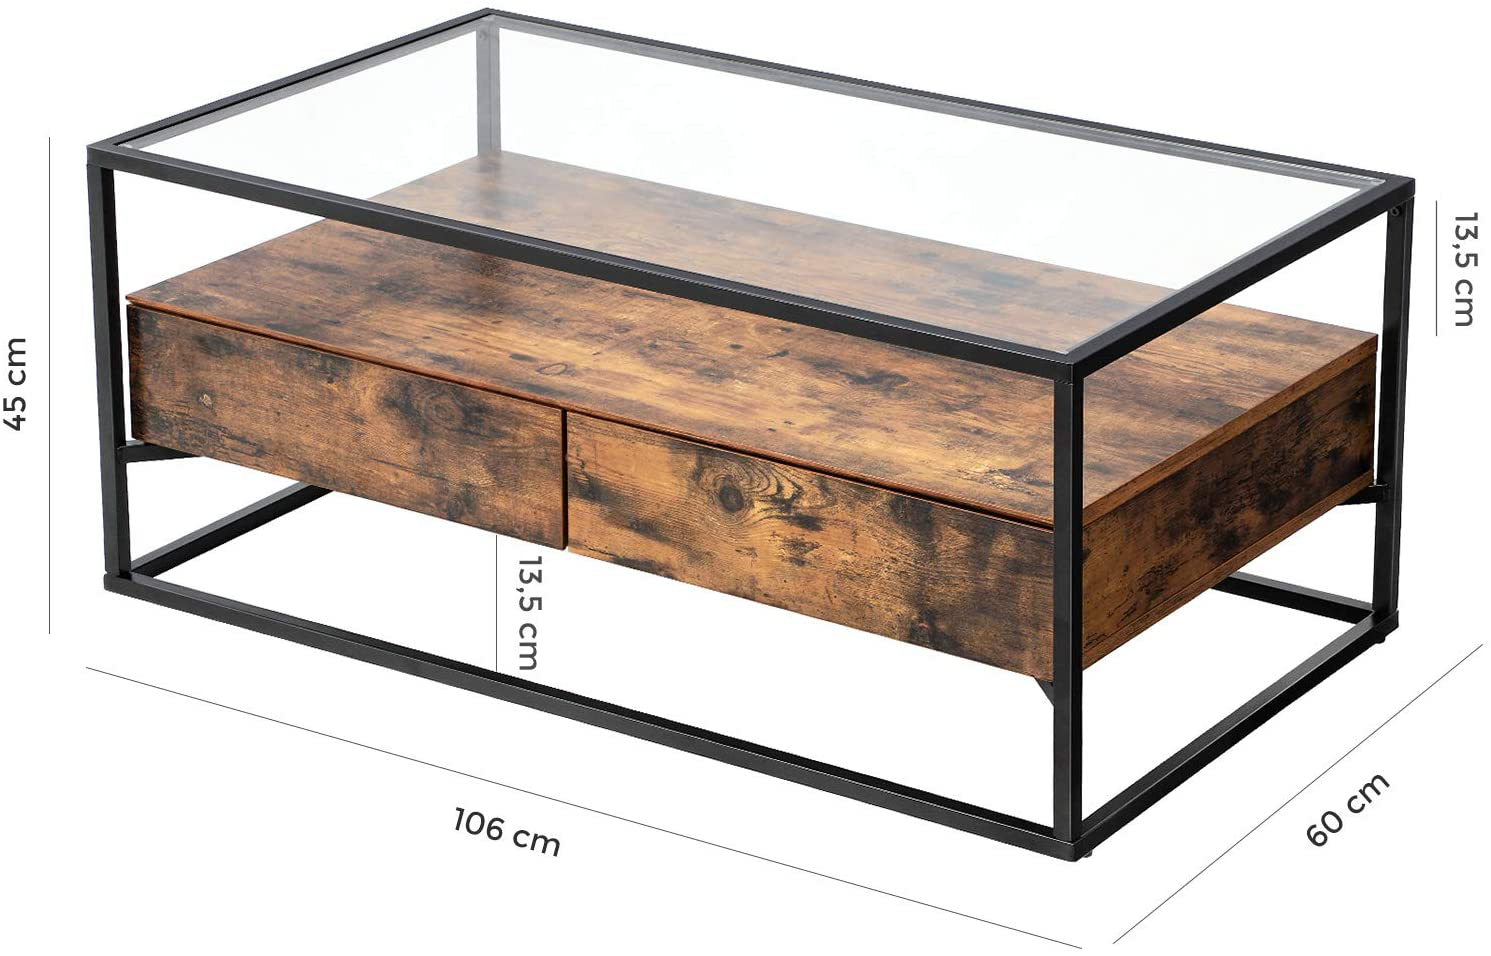 Rena Glass Coffee Table with 2 Drawers and Rustic Shelf